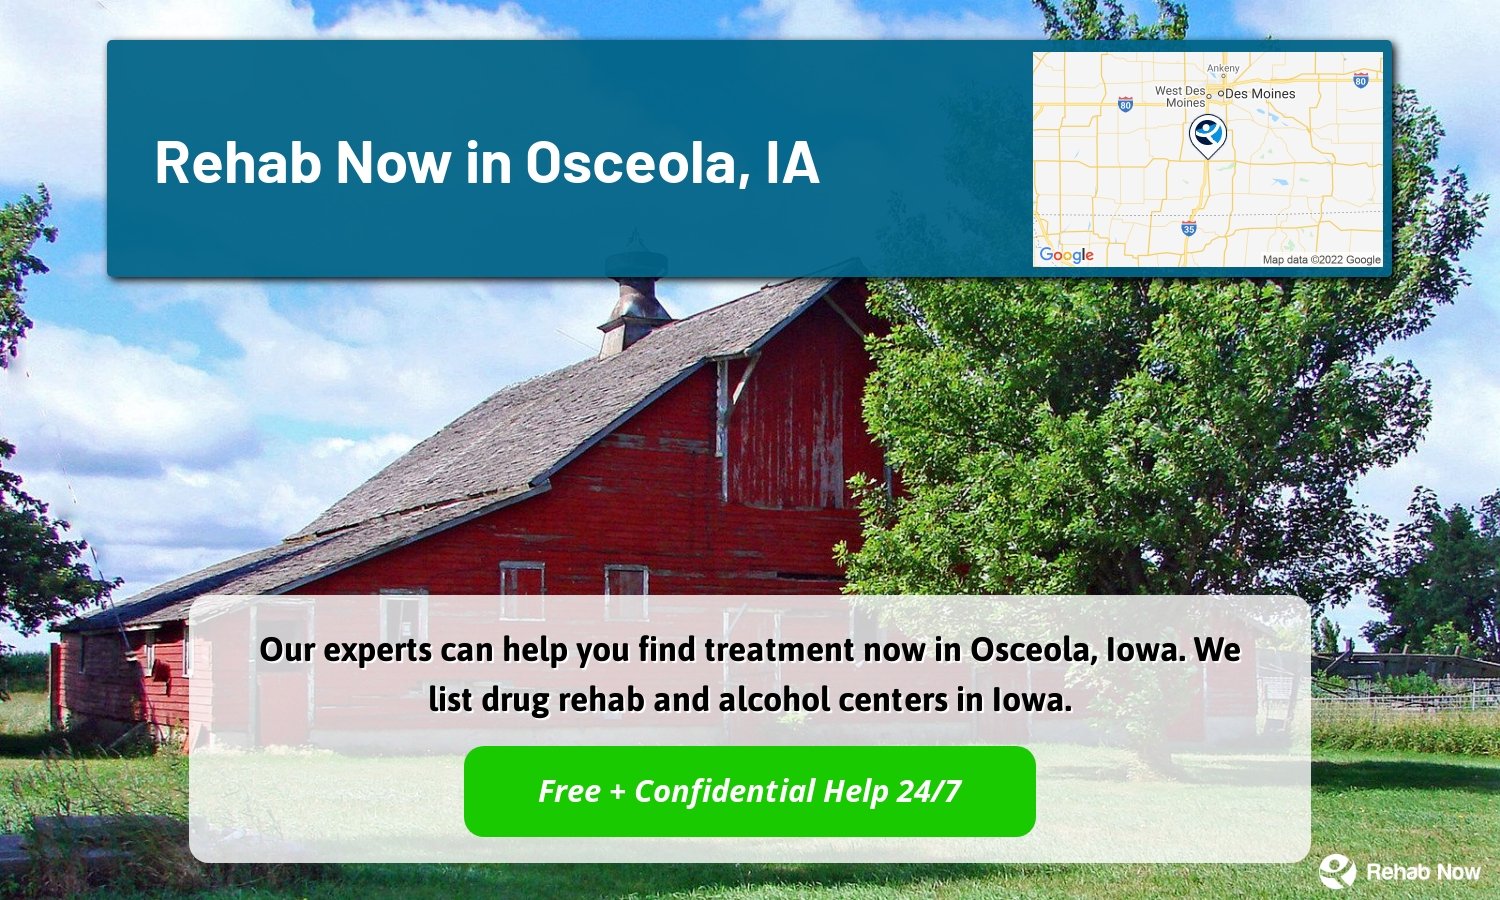 Our experts can help you find treatment now in Osceola, Iowa. We list drug rehab and alcohol centers in Iowa.